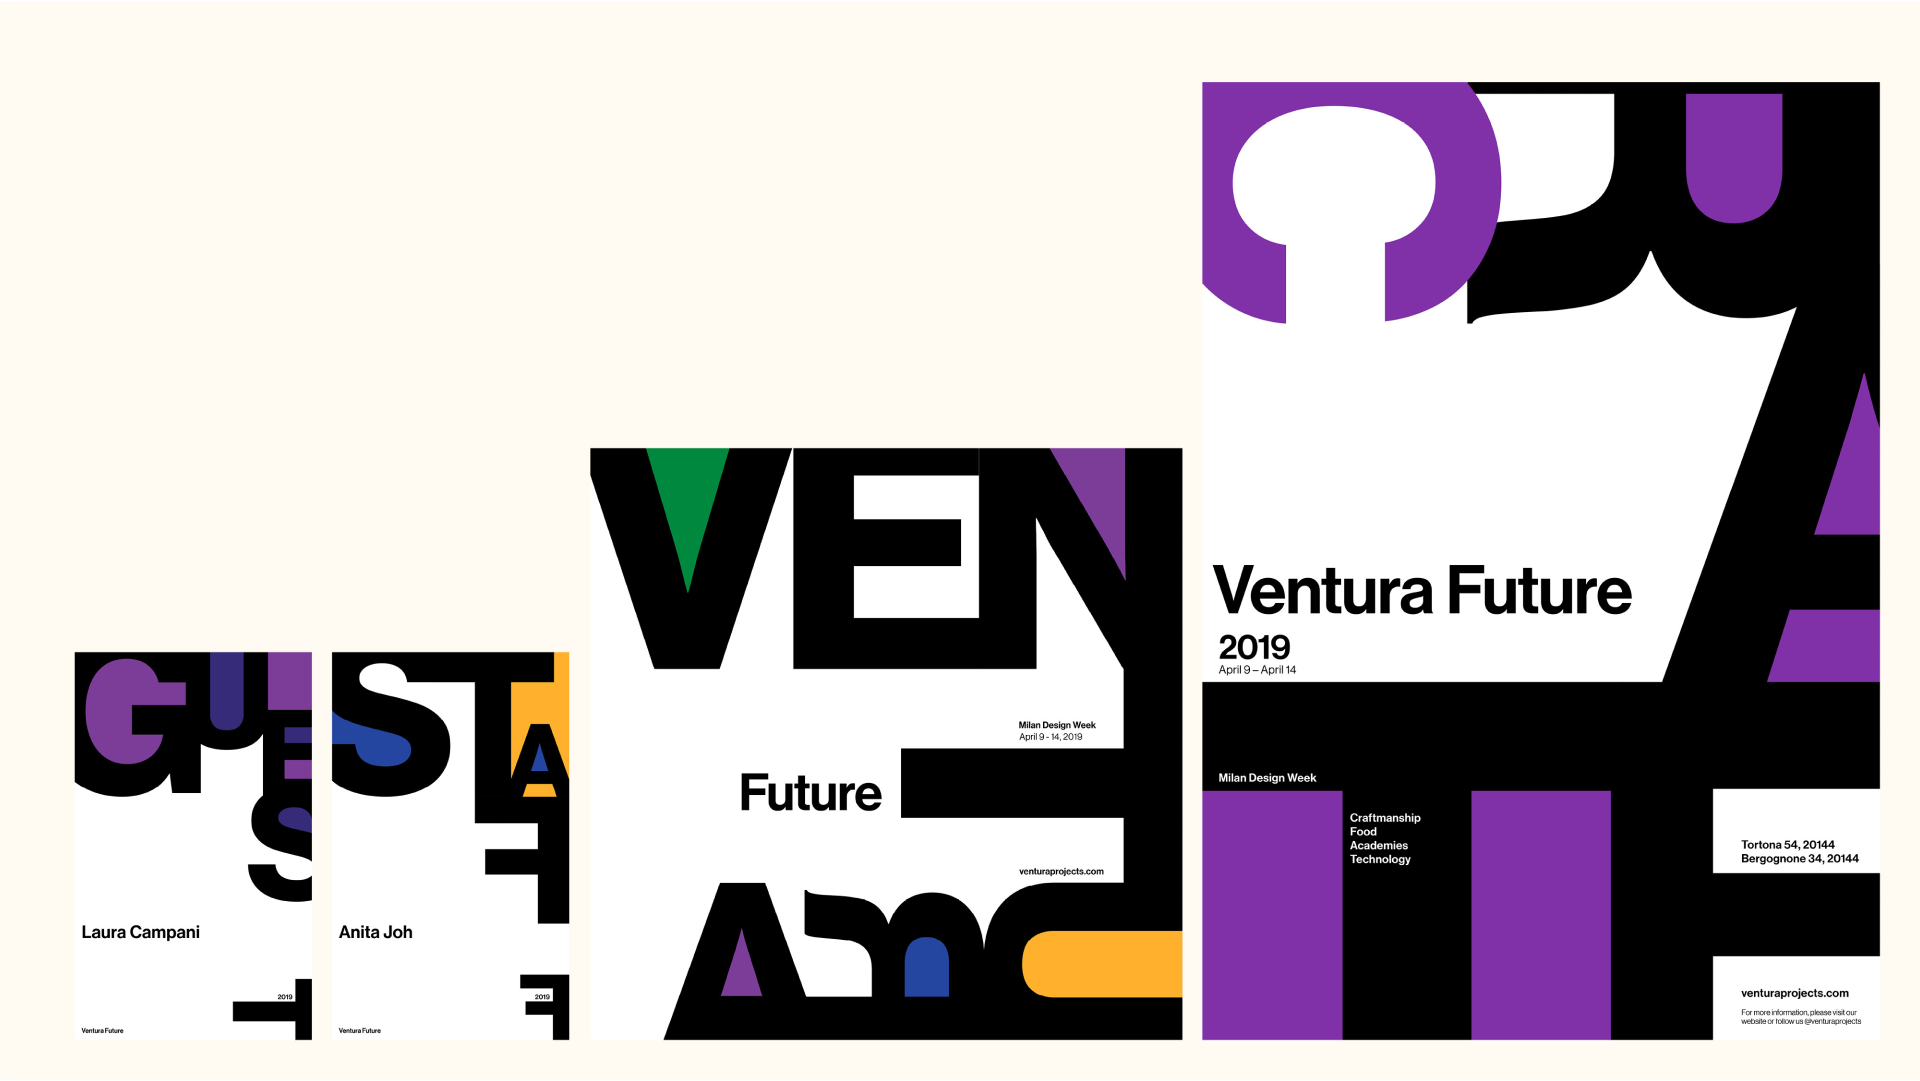 An image a set of graphic assets for the Ventura Future project